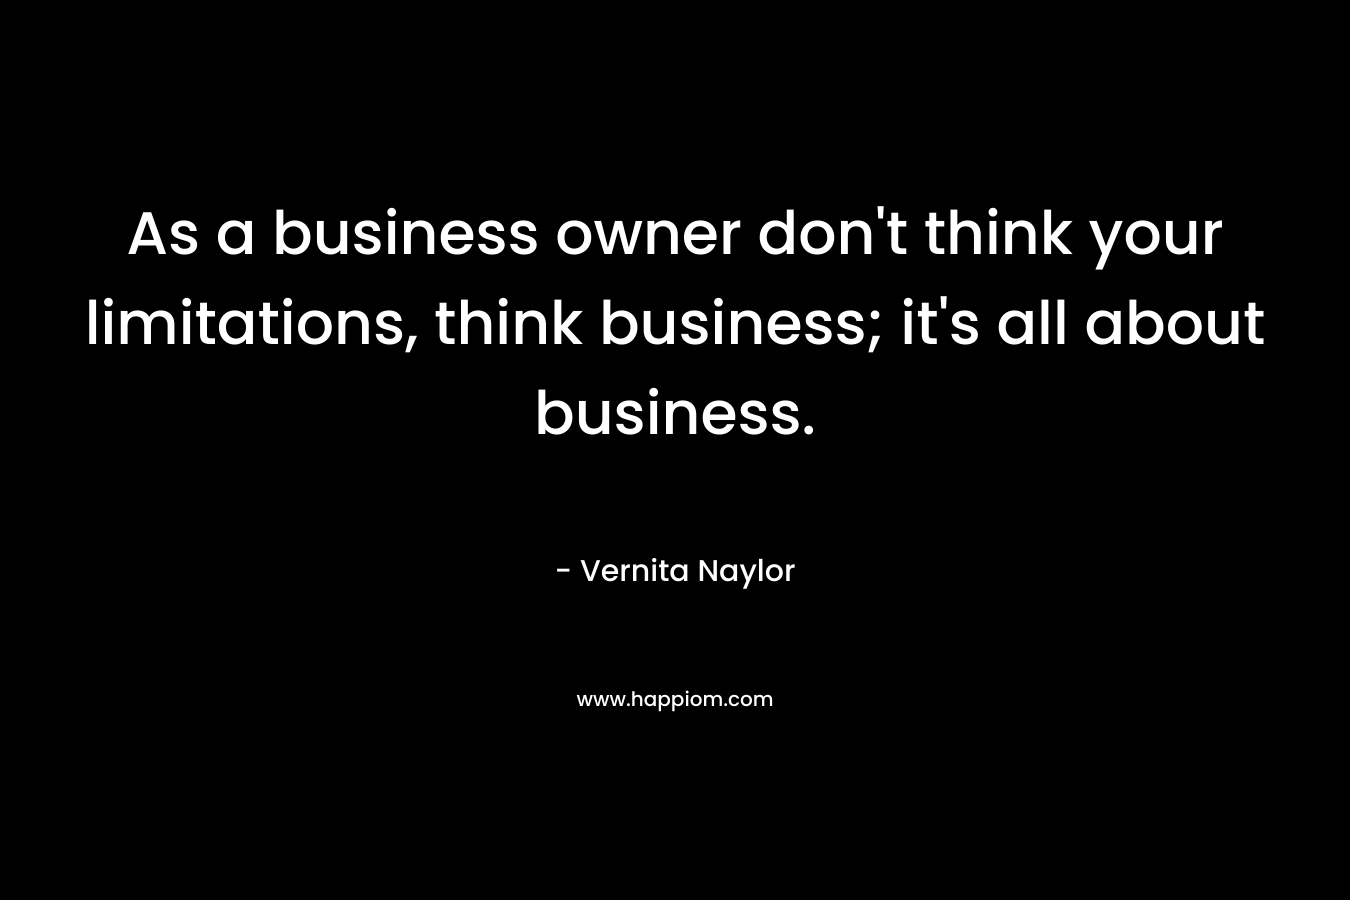 As a business owner don’t think your limitations, think business; it’s all about business. – Vernita Naylor